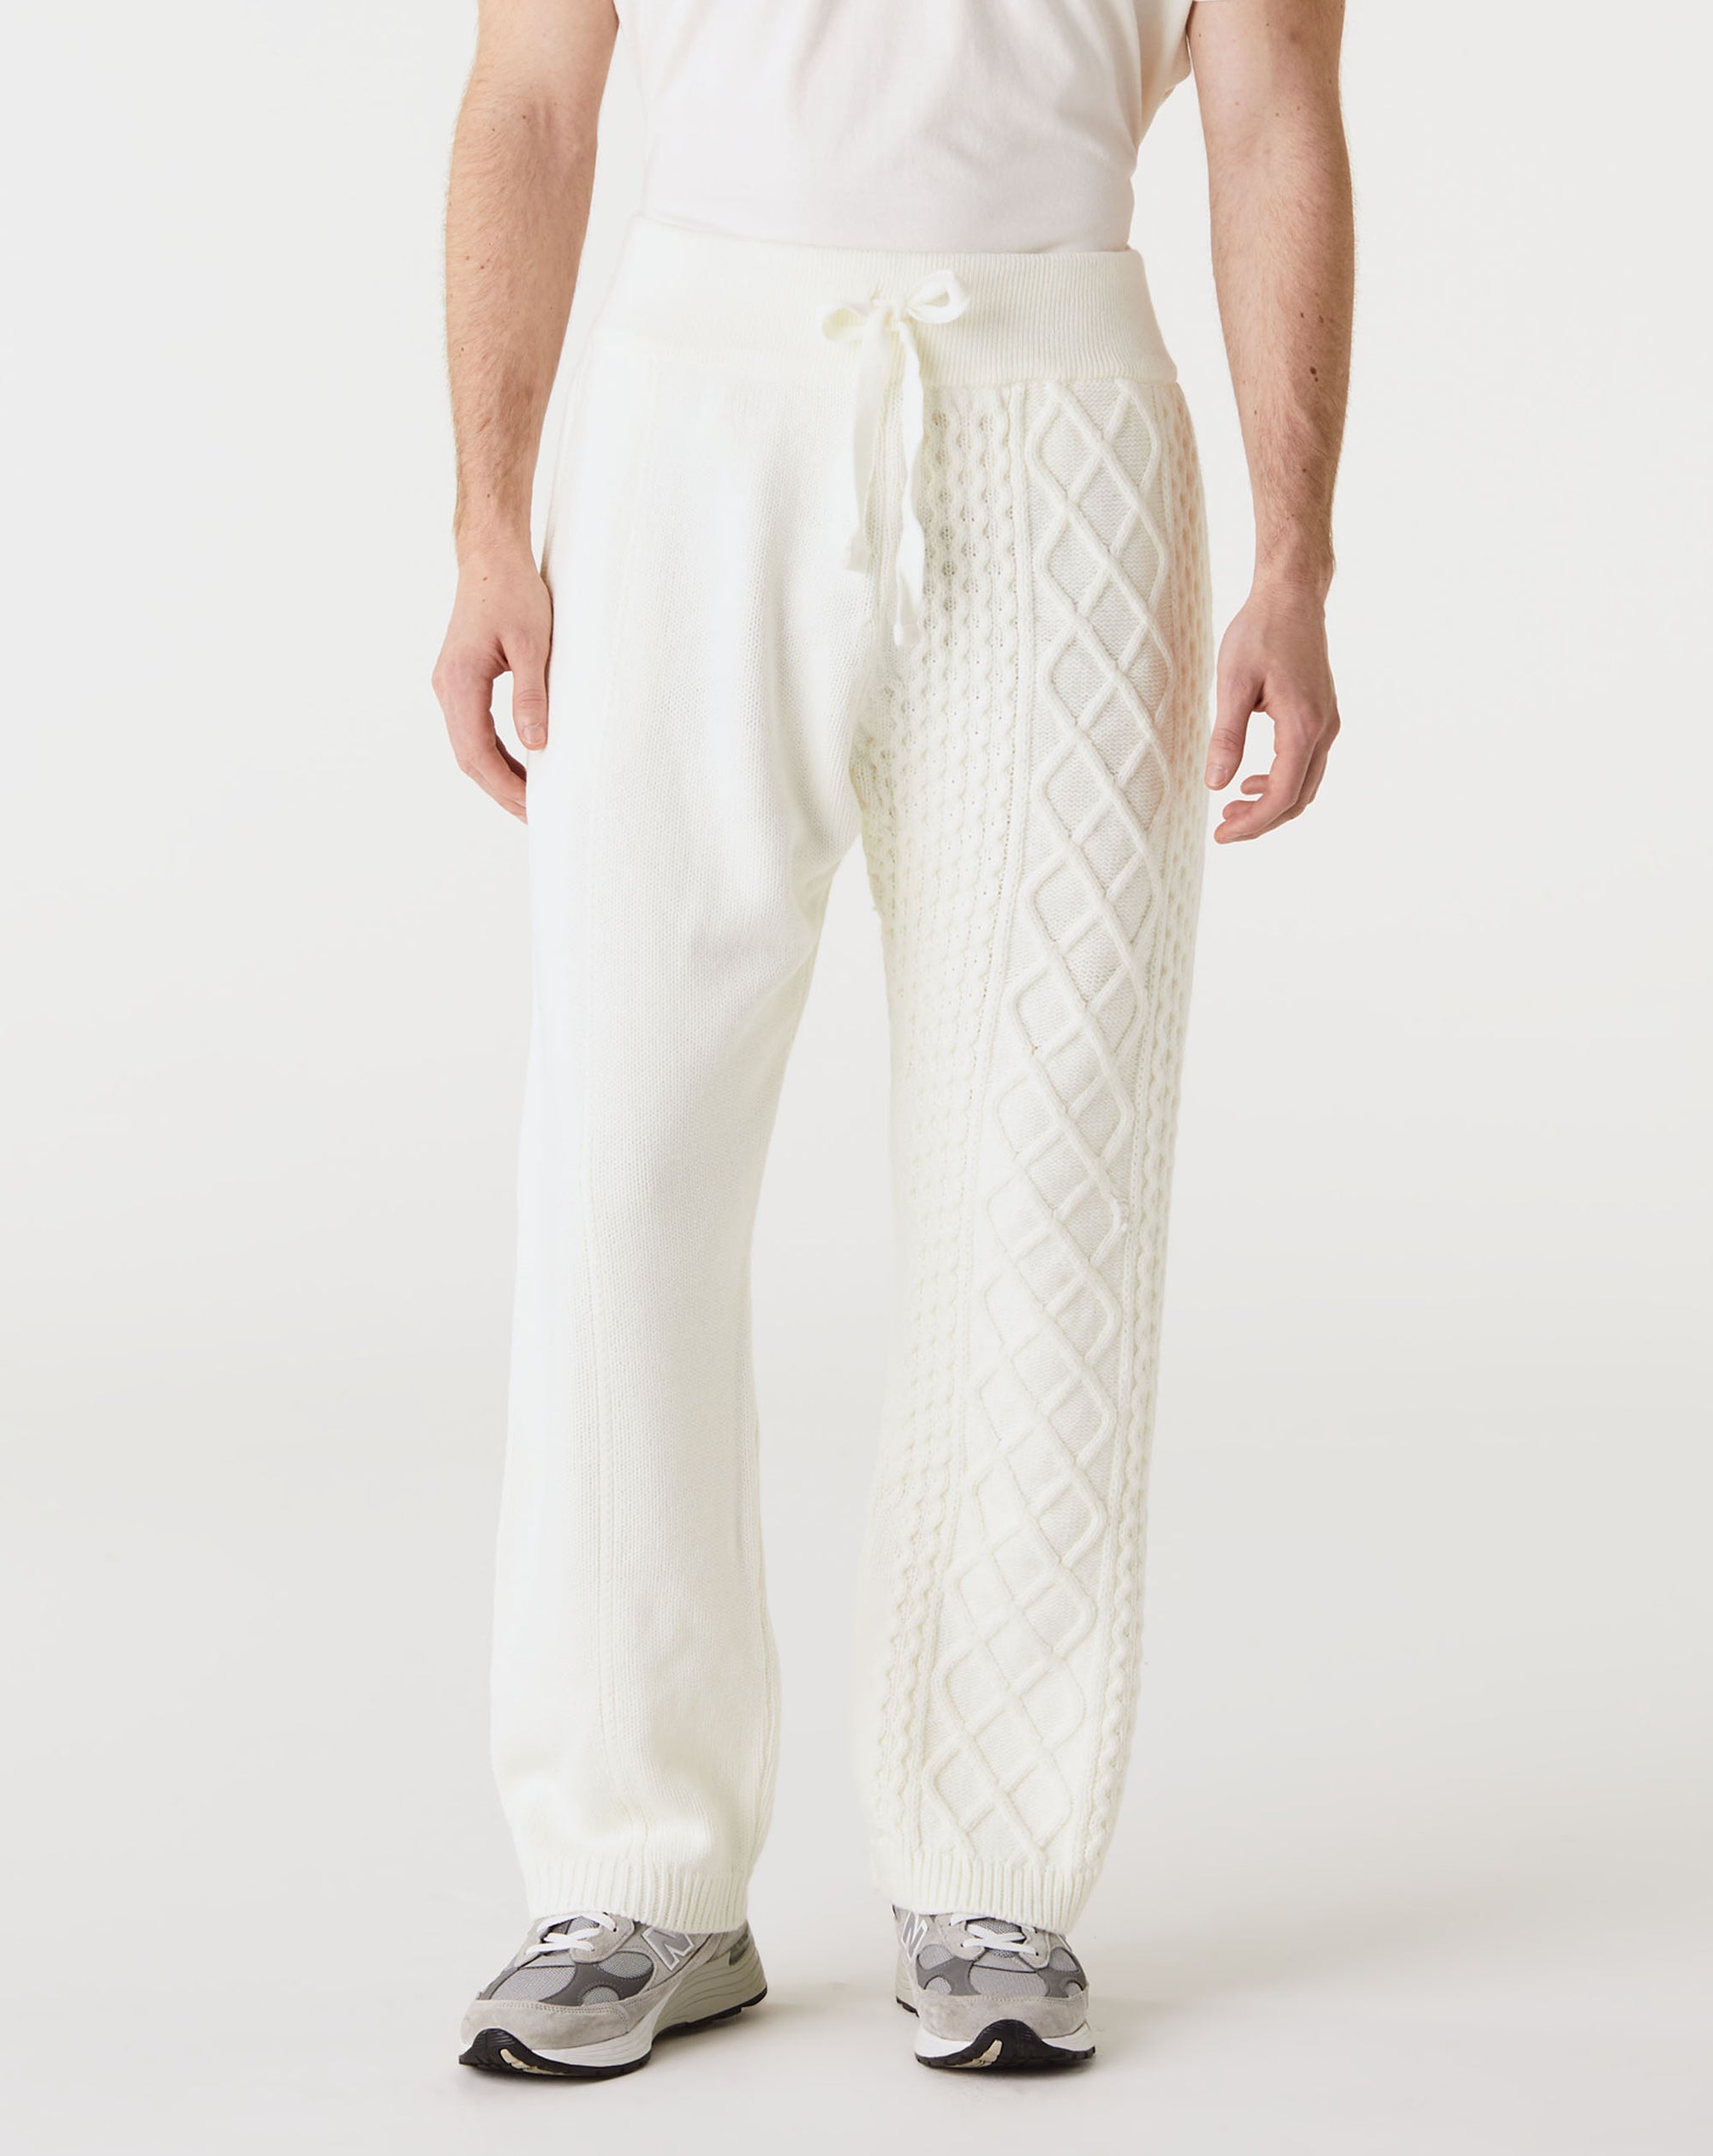 Family First Braided Pant - Rule of Next Apparel